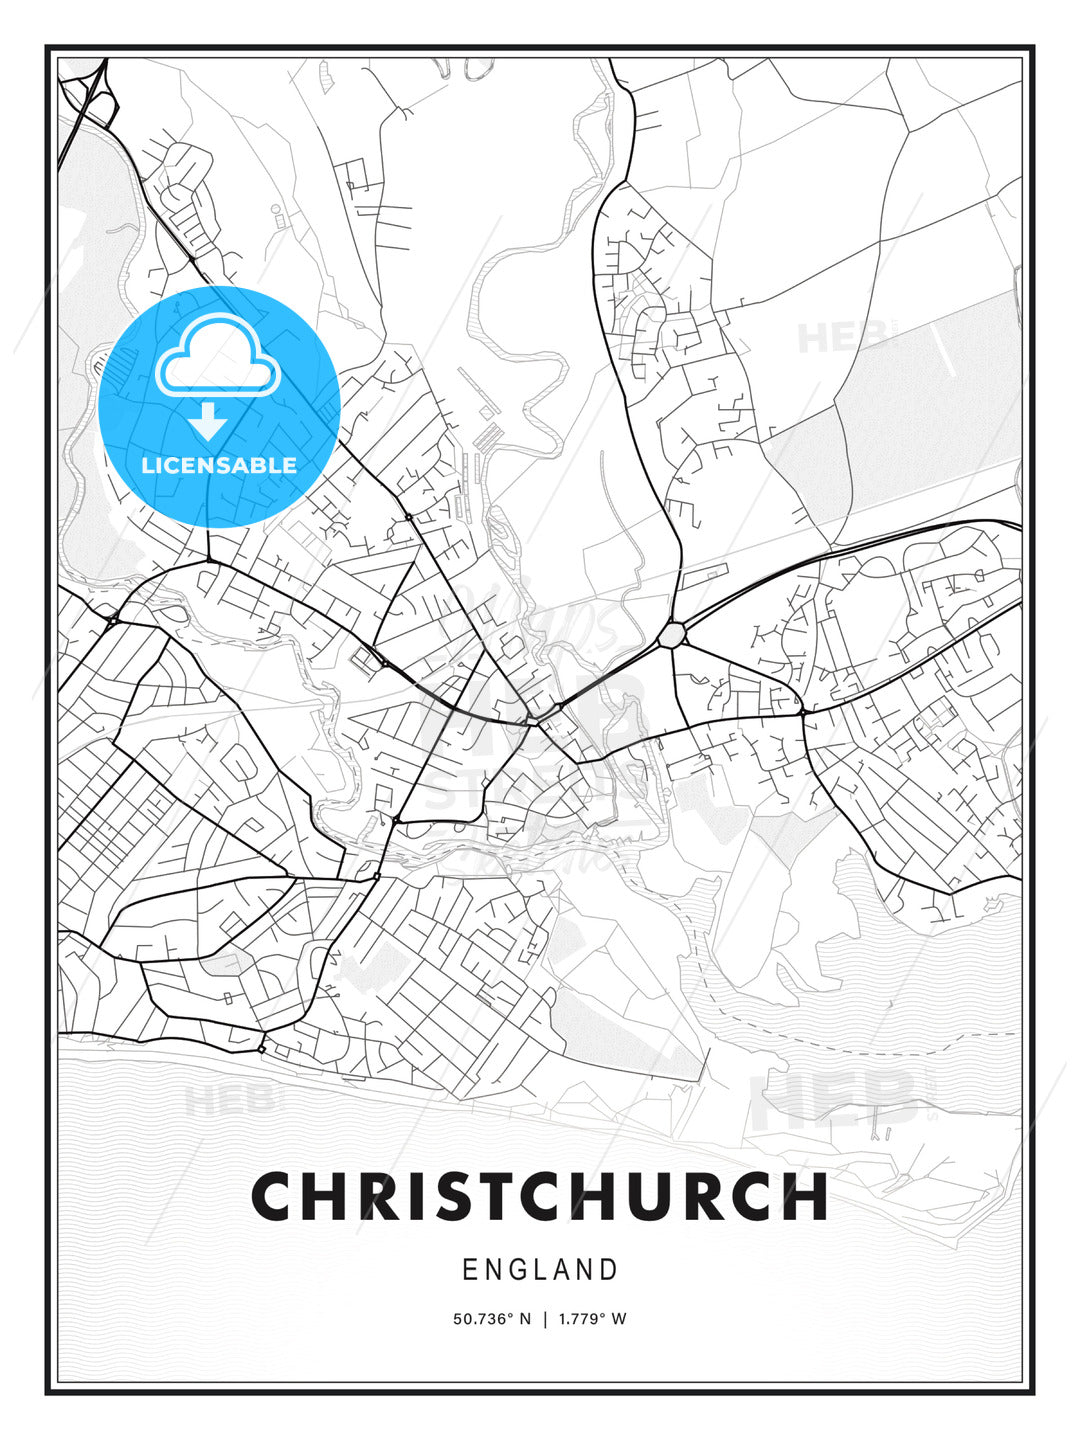 Christchurch, England, Modern Print Template in Various Formats - HEBSTREITS Sketches